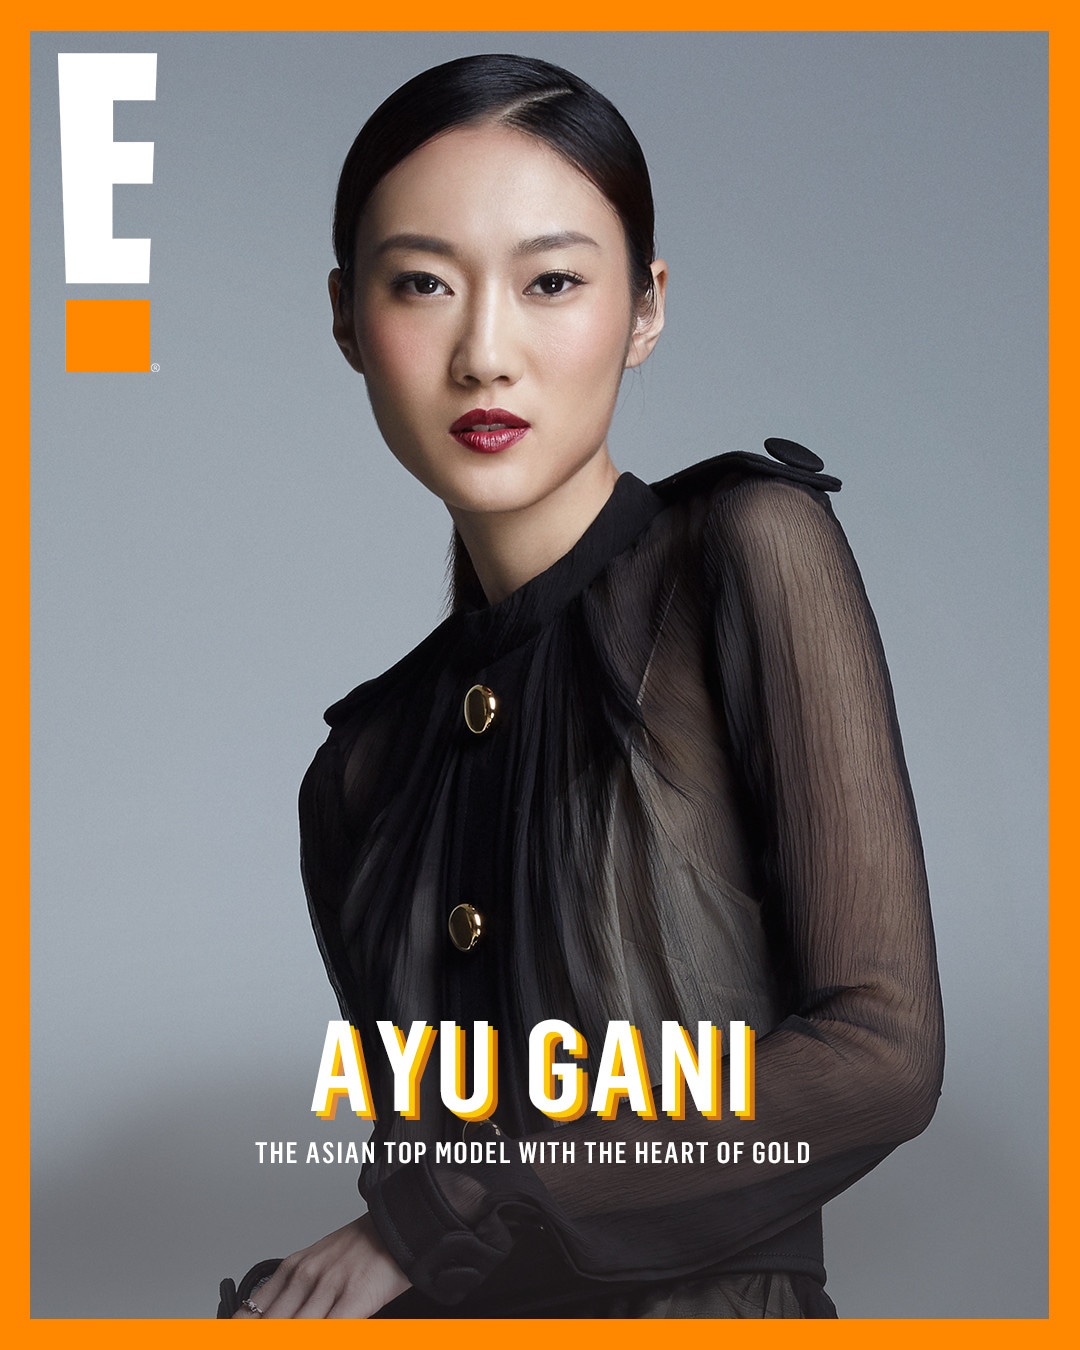 Women To Watch Ayu Gani The Asian Top Model With The Heart Of Gold E News